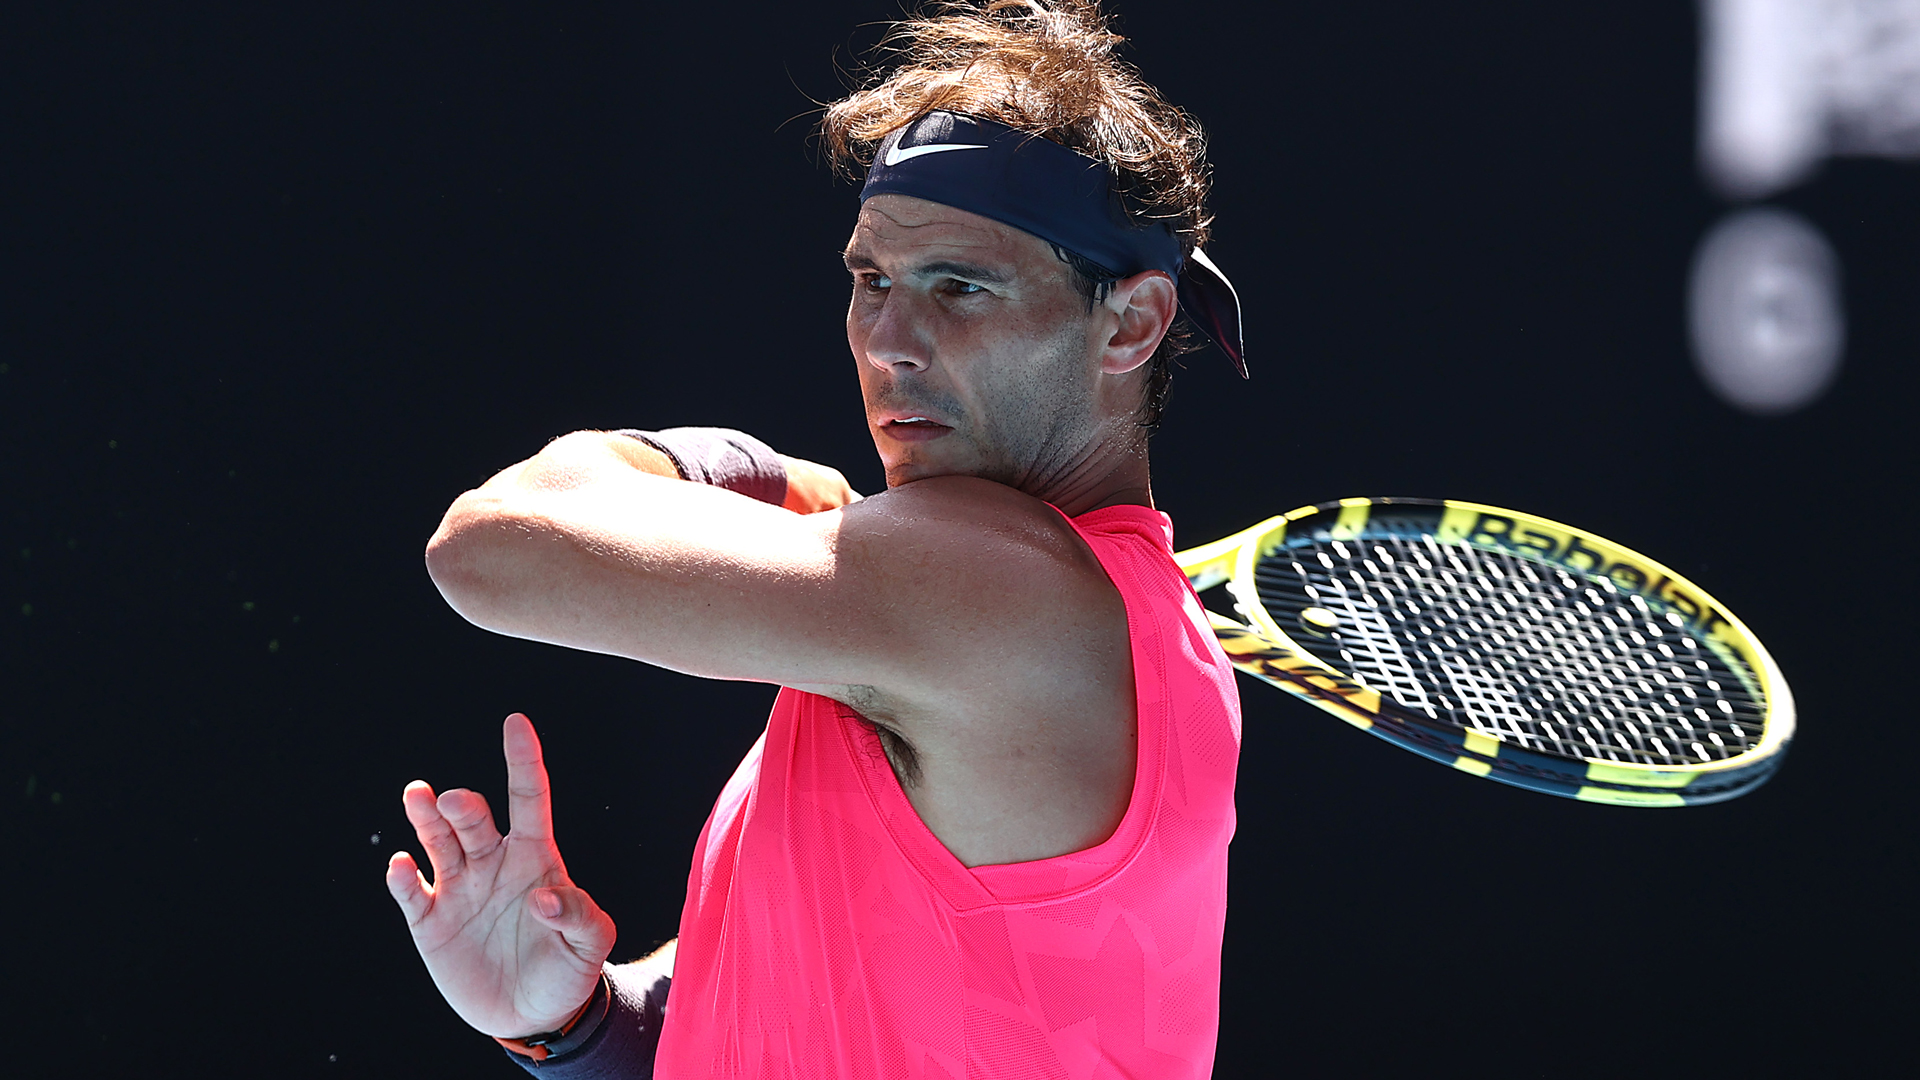 Rafael Nadal has entered the Madrid Open, a move that raises the question of whether he intends to play the US Open.